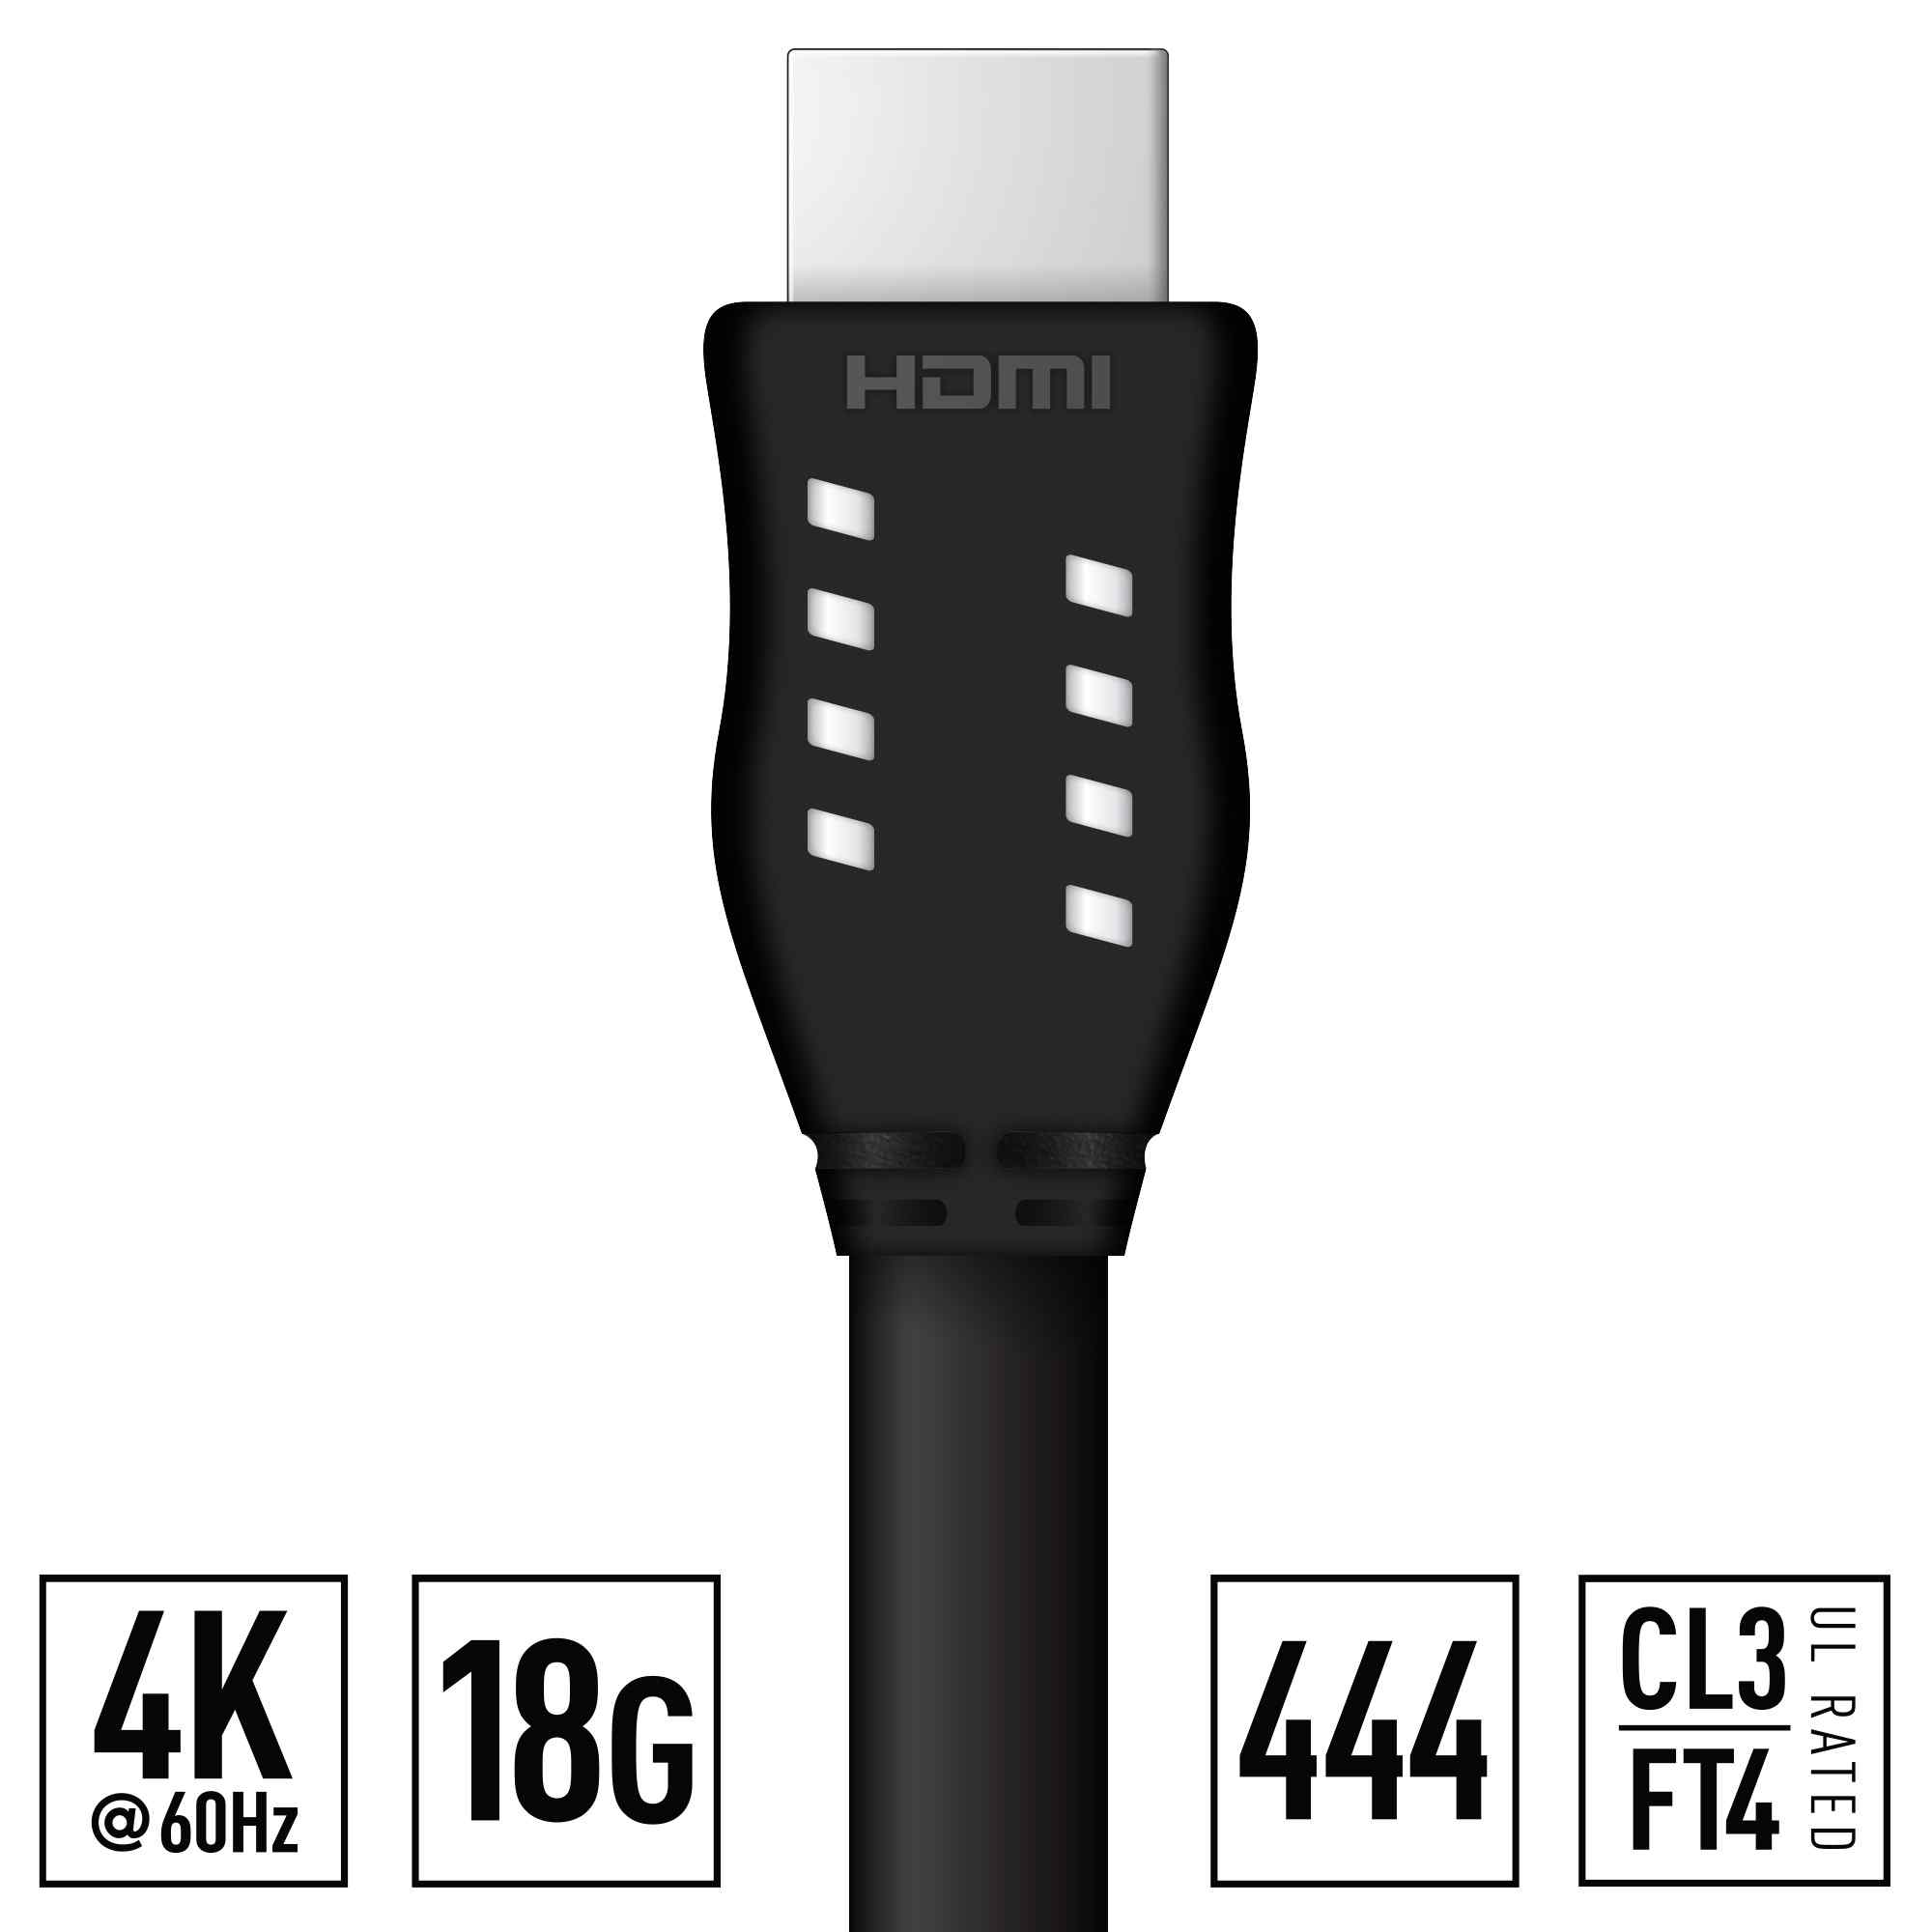 Thumbnail of Key Digital 4k certified HDMI cable rear view